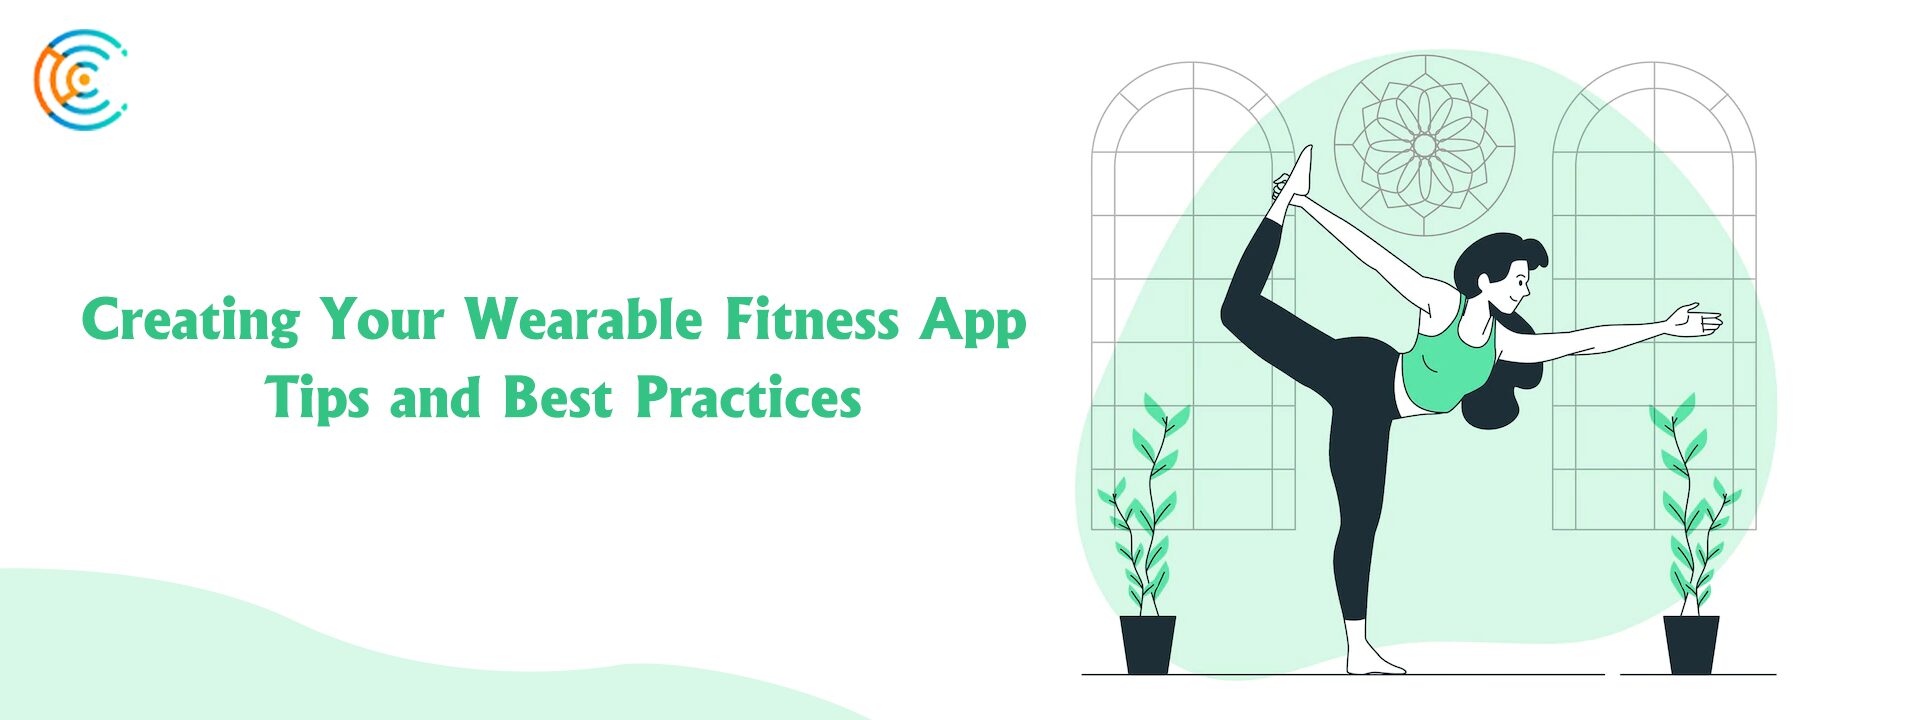 Creating Your Wearable Fitness App Tips